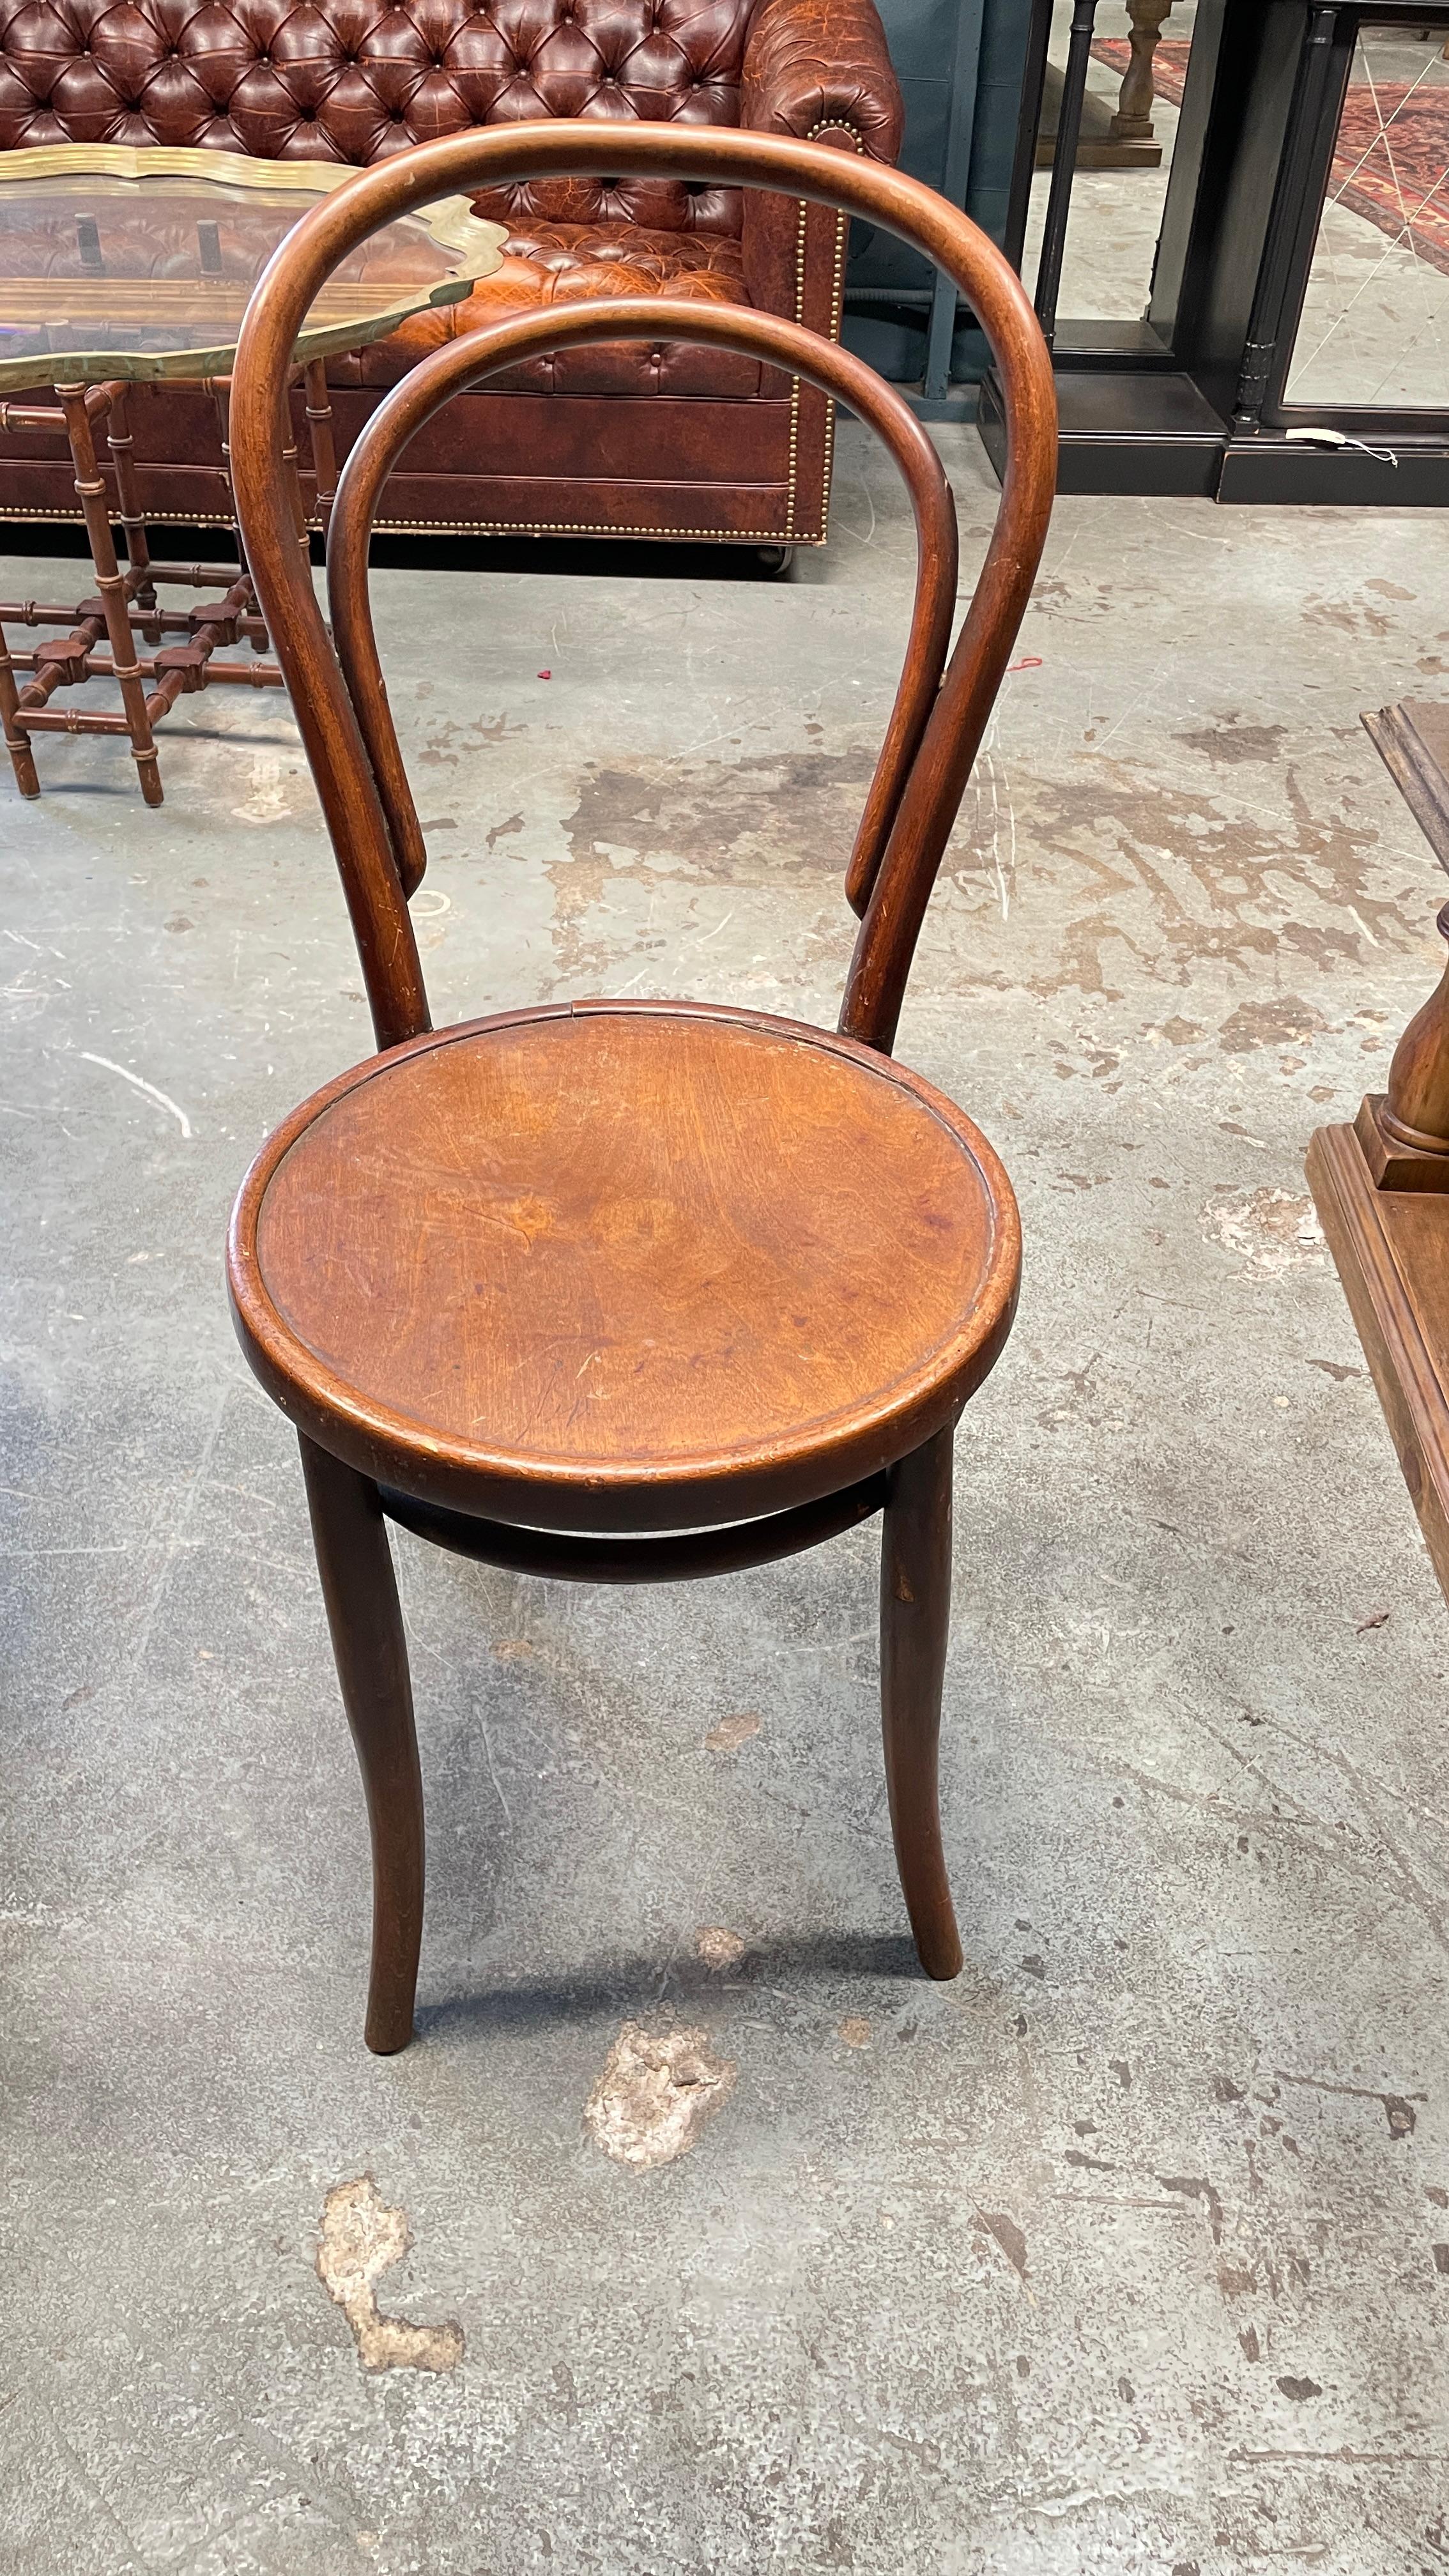 Antique Thonet-style walnut bentwood dining chairs with splayed hairpin legs and two distinct curves making up the back of the chair. This sturdy chair boasts a rich walnut finish.

